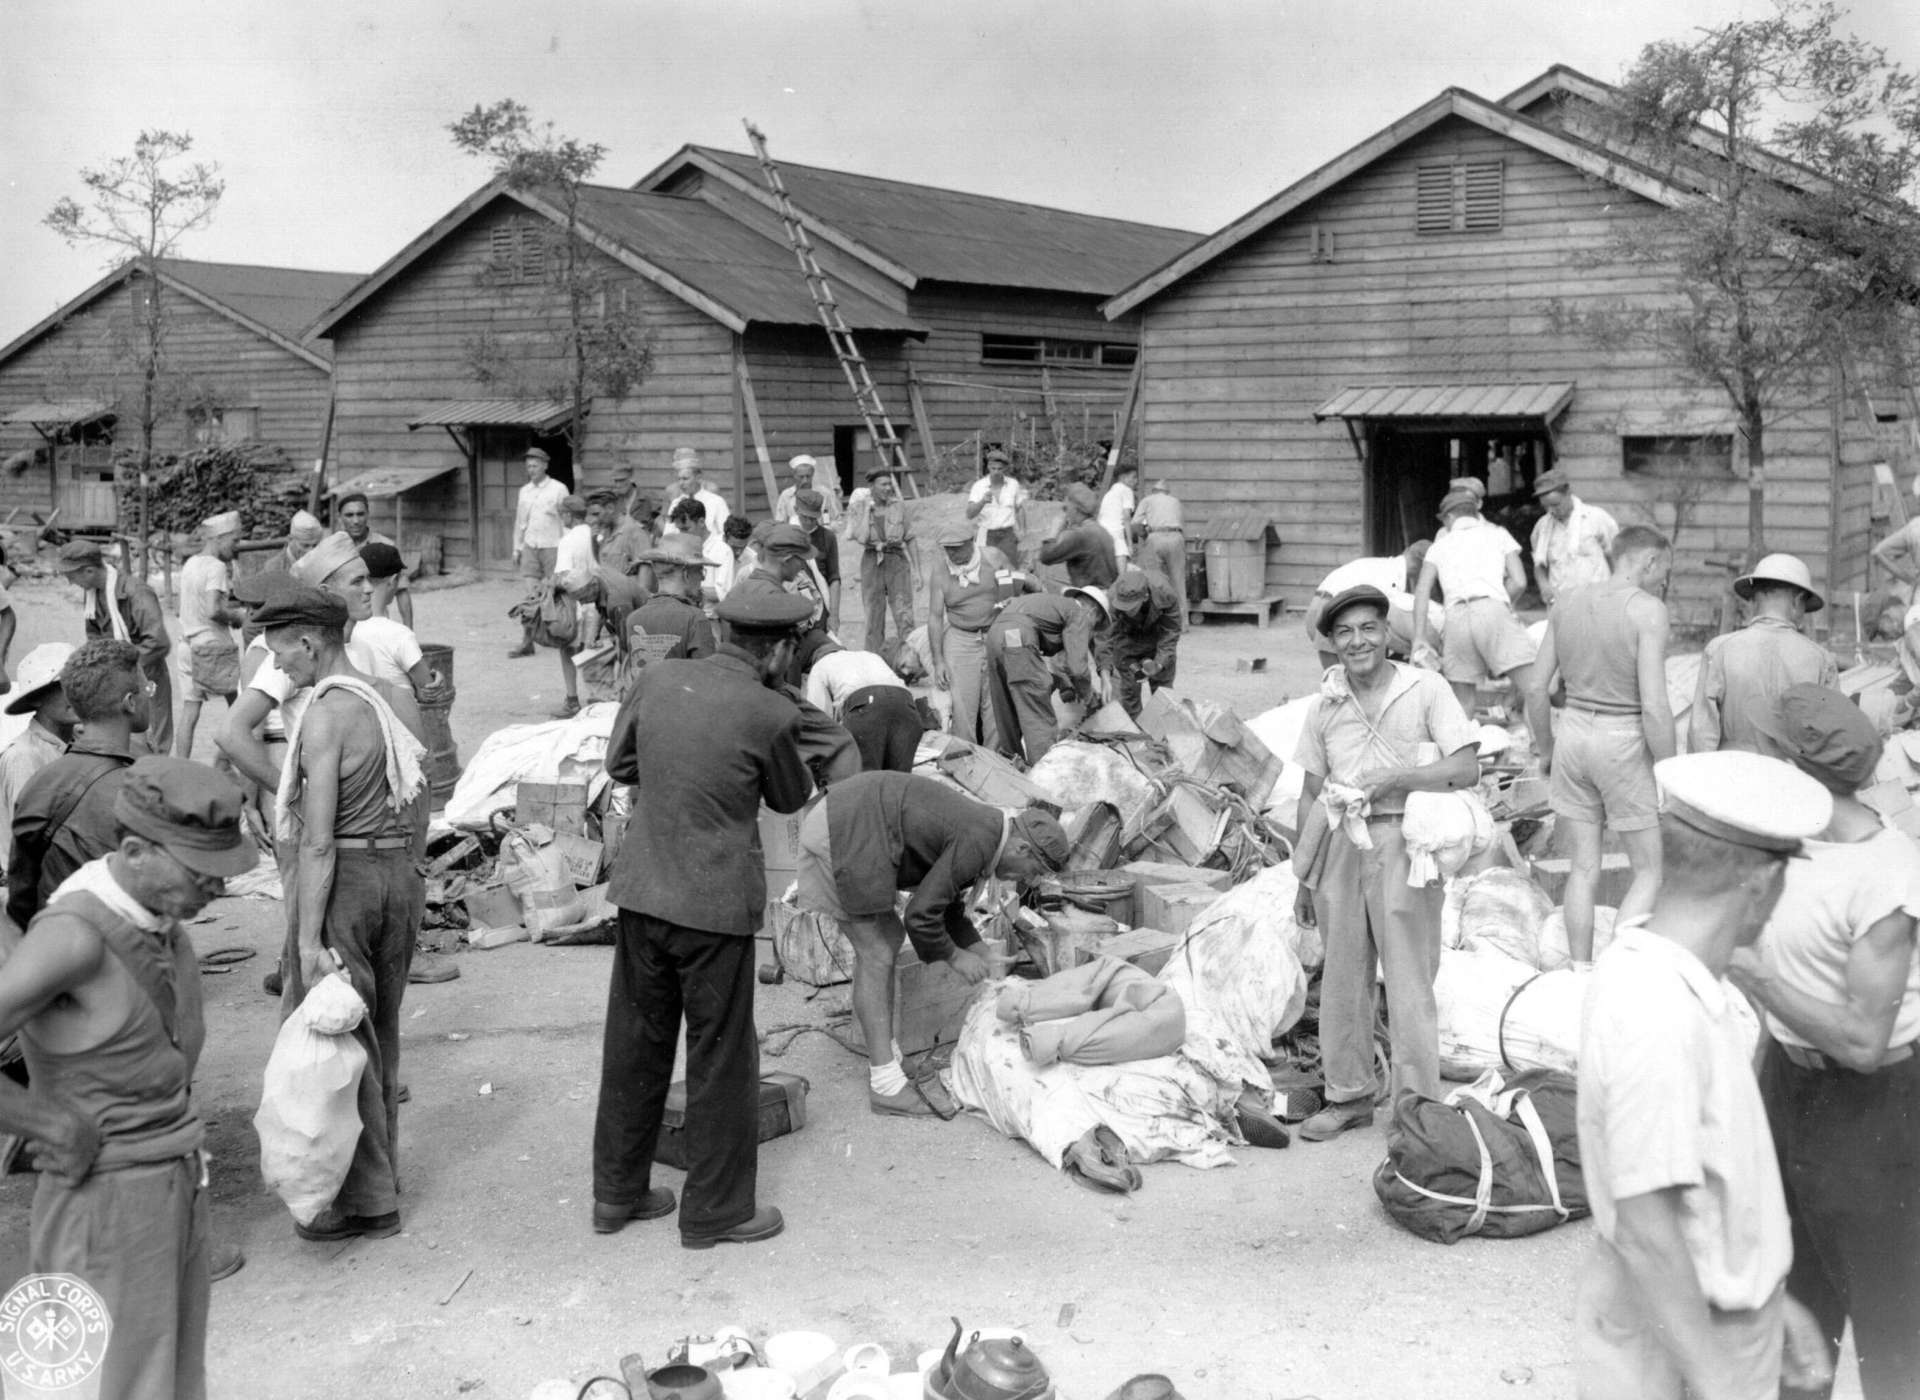 POWS at the Omori Prison receiving new clothes, undated, courtesy of the National Archives and Records Administration.